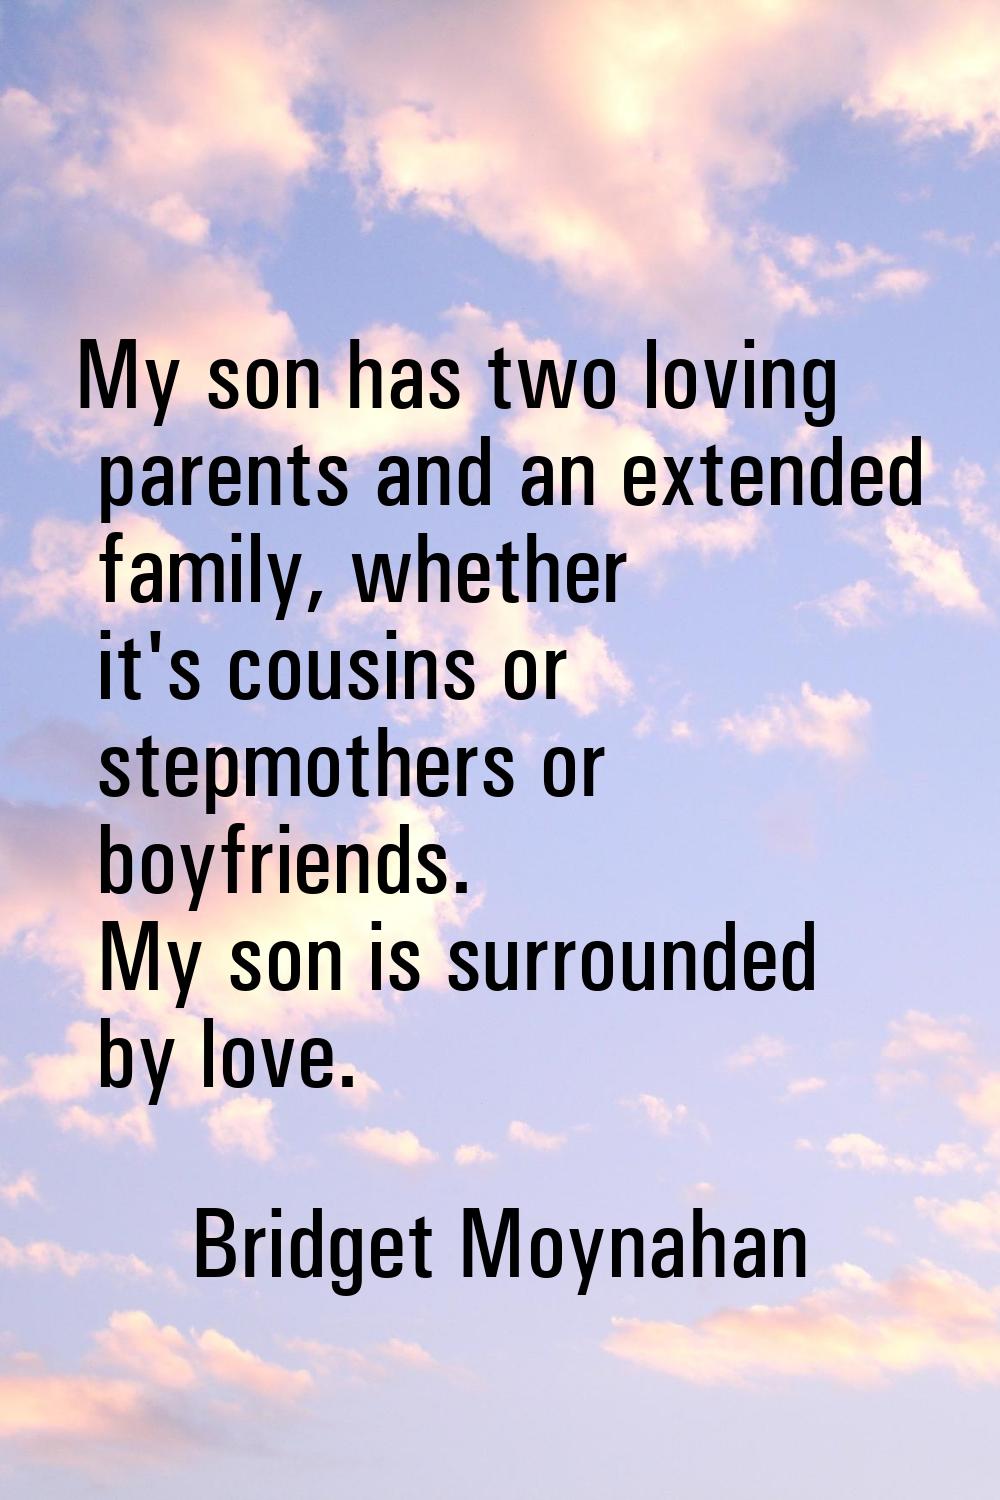 My son has two loving parents and an extended family, whether it's cousins or stepmothers or boyfri